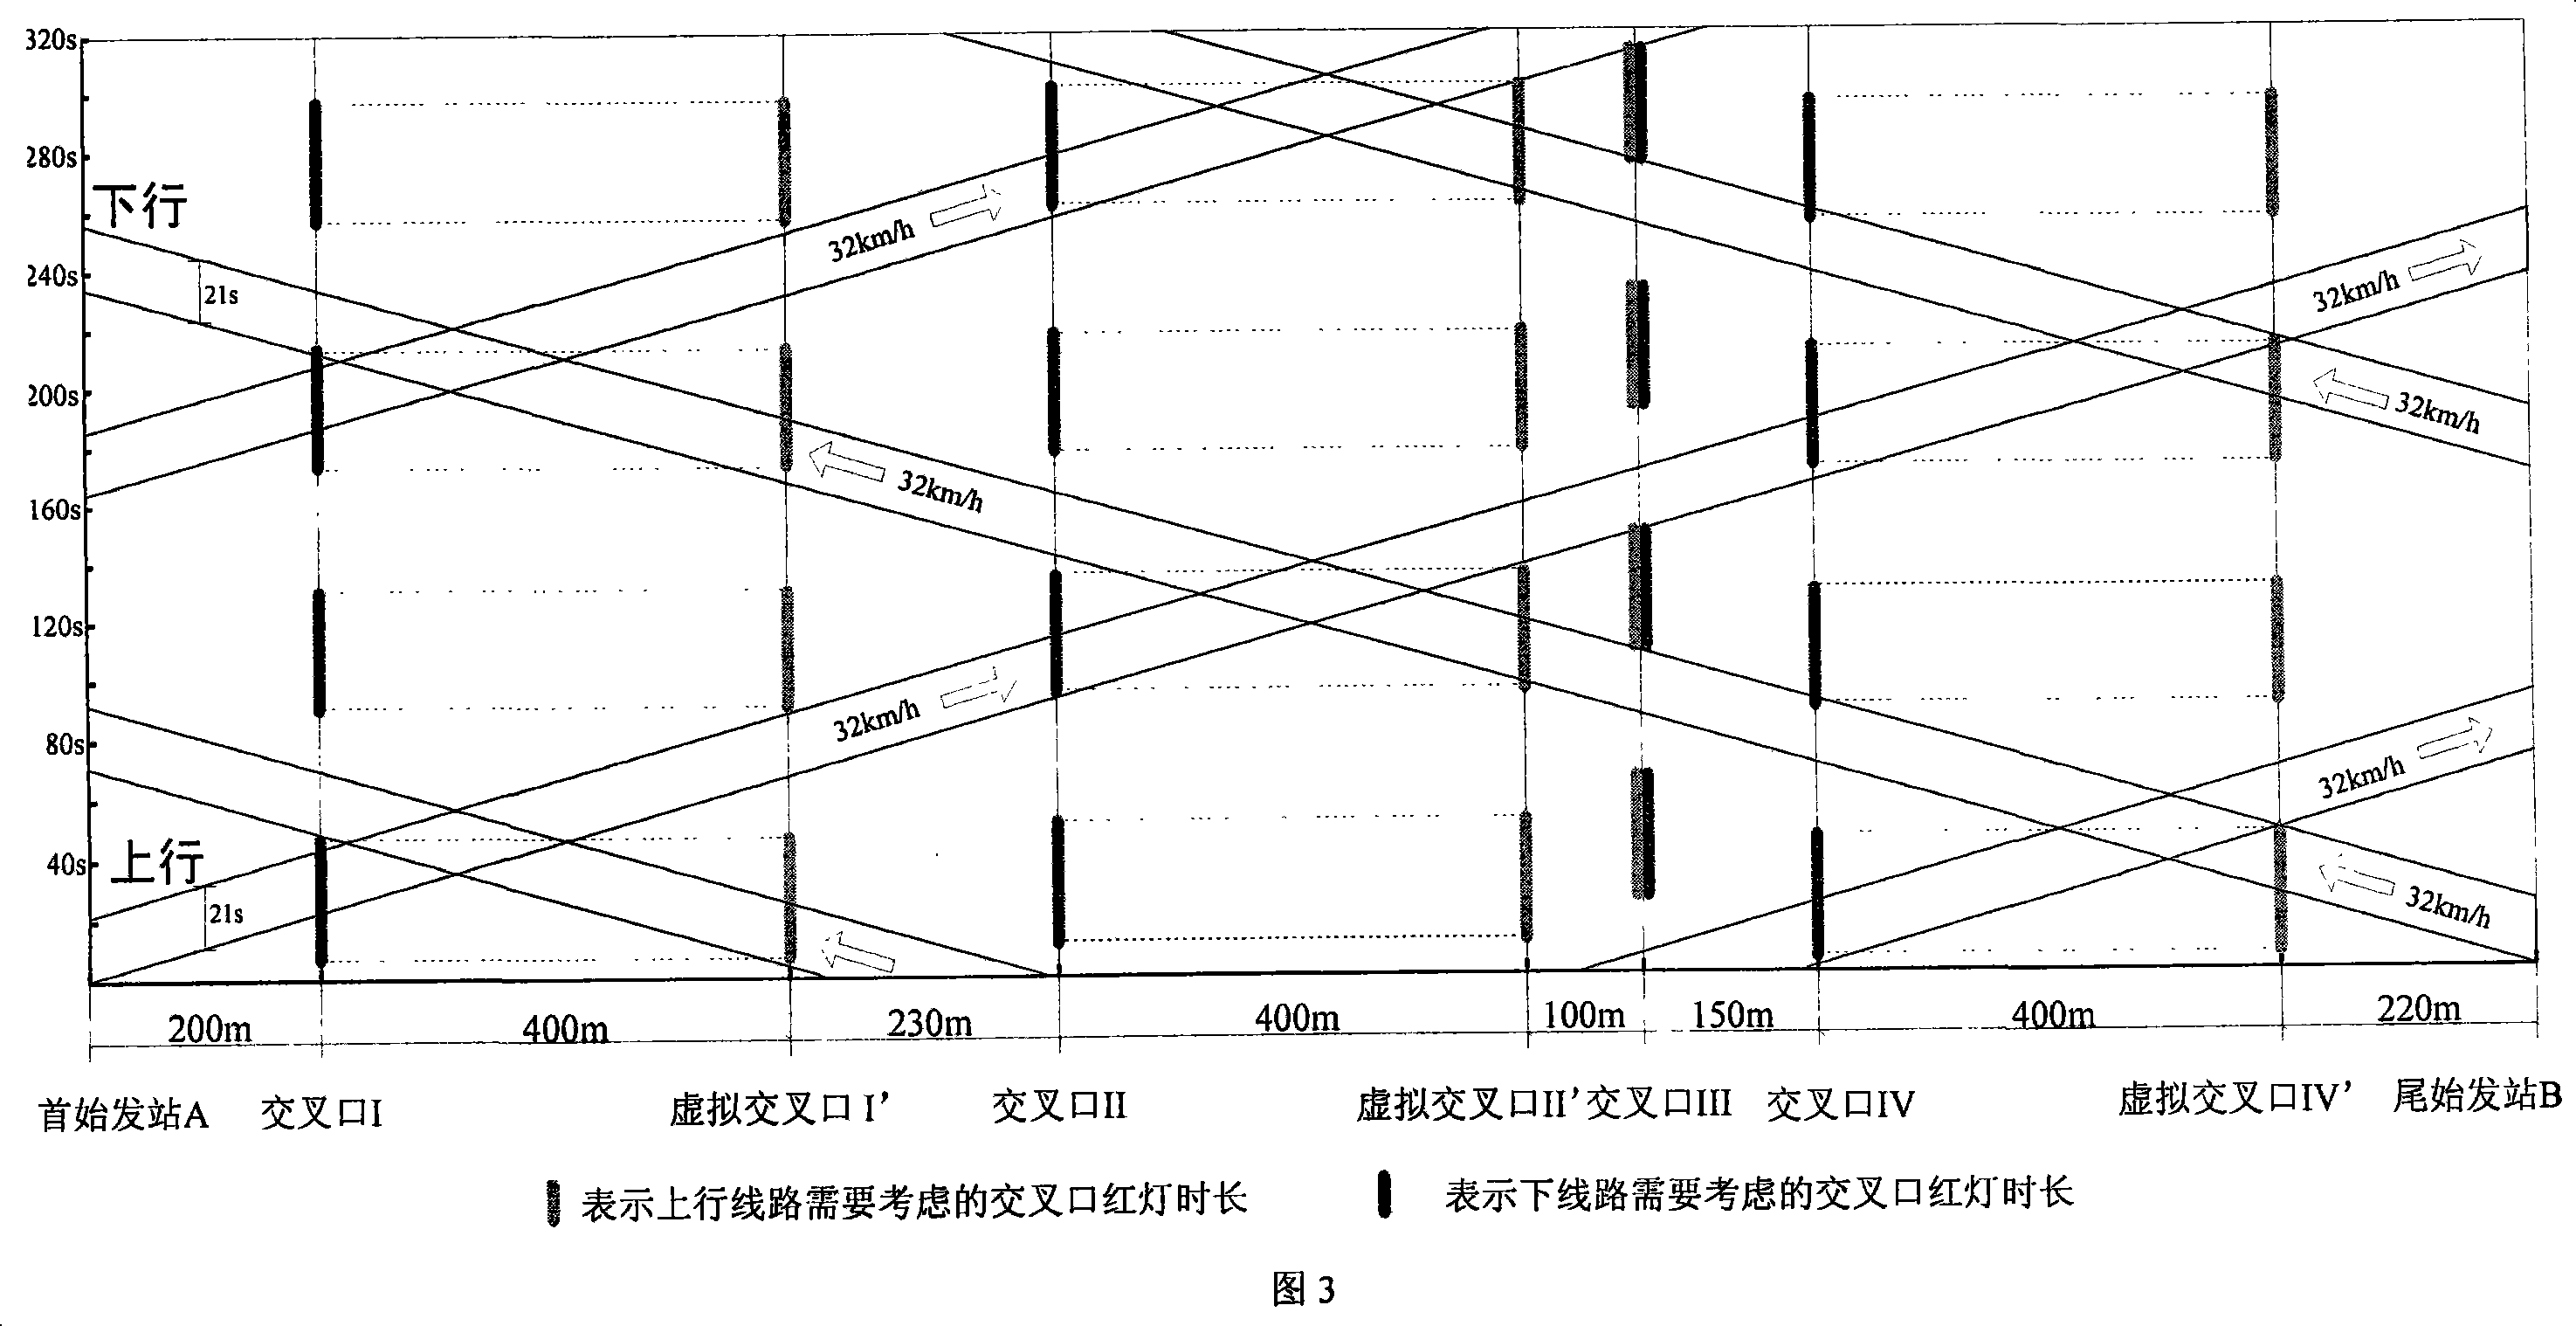 Signal coordinating control method of one-road one-line straightgoing type public transport system